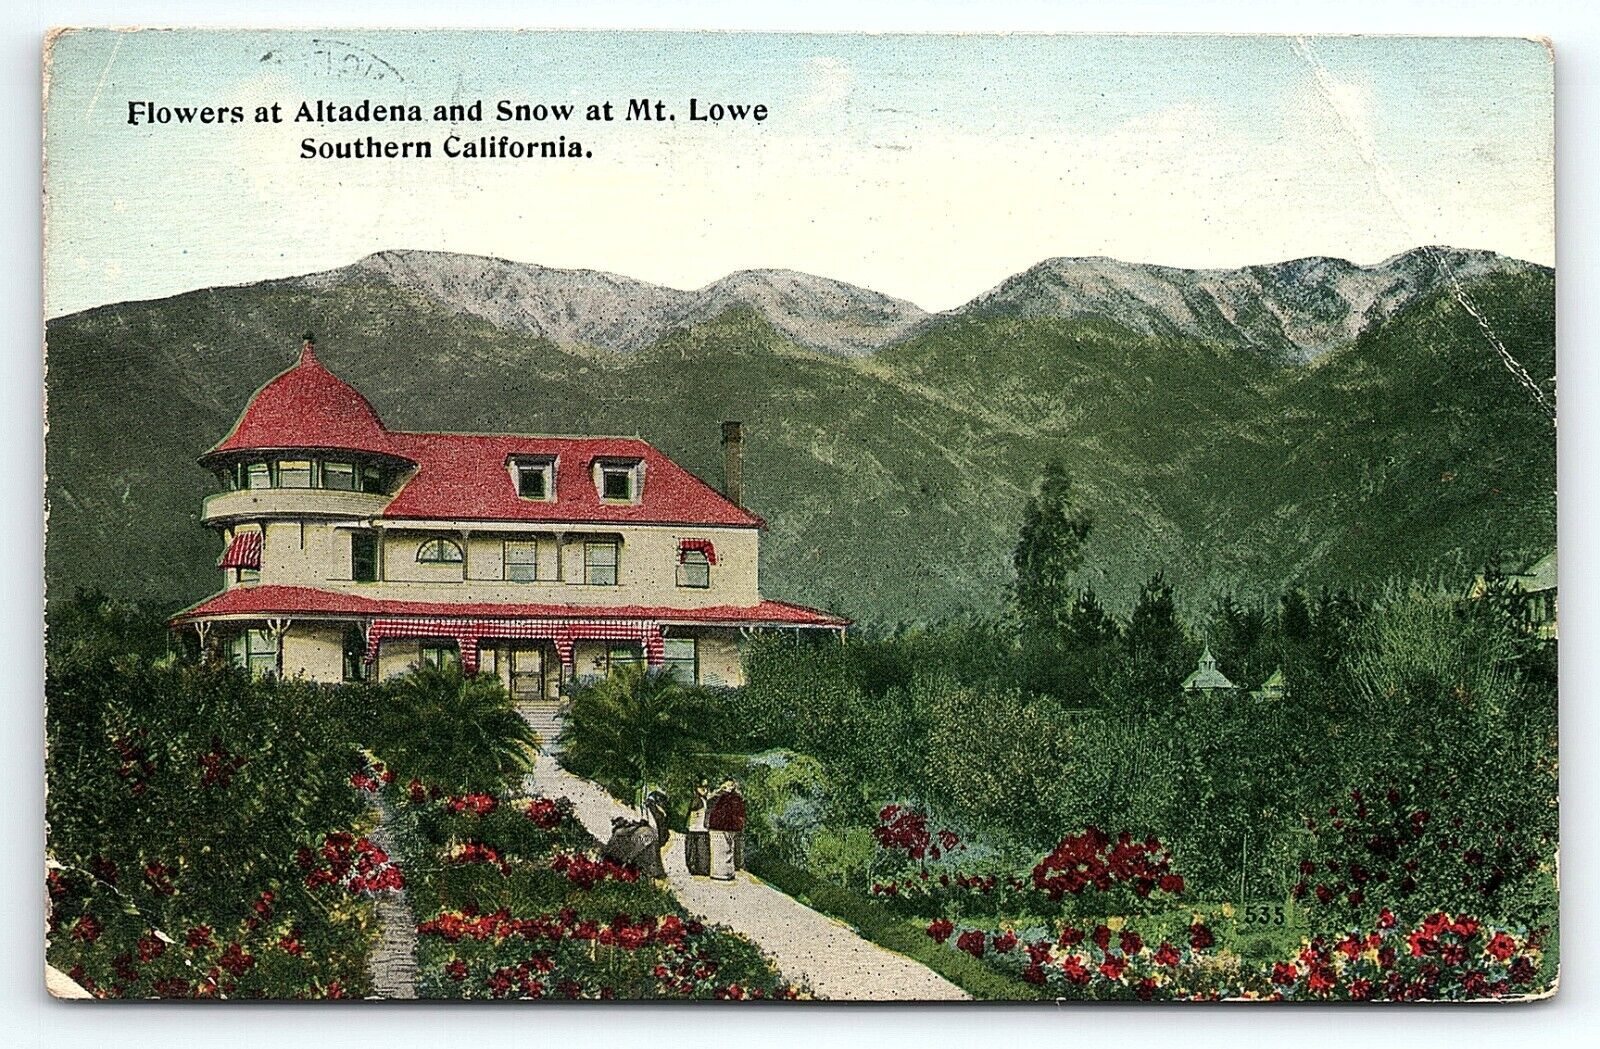 1913 SOUTHERN CALIFORNIA FLOWERS AT ALTADENA SHOW AT MT LOWE POSTCARD P3571